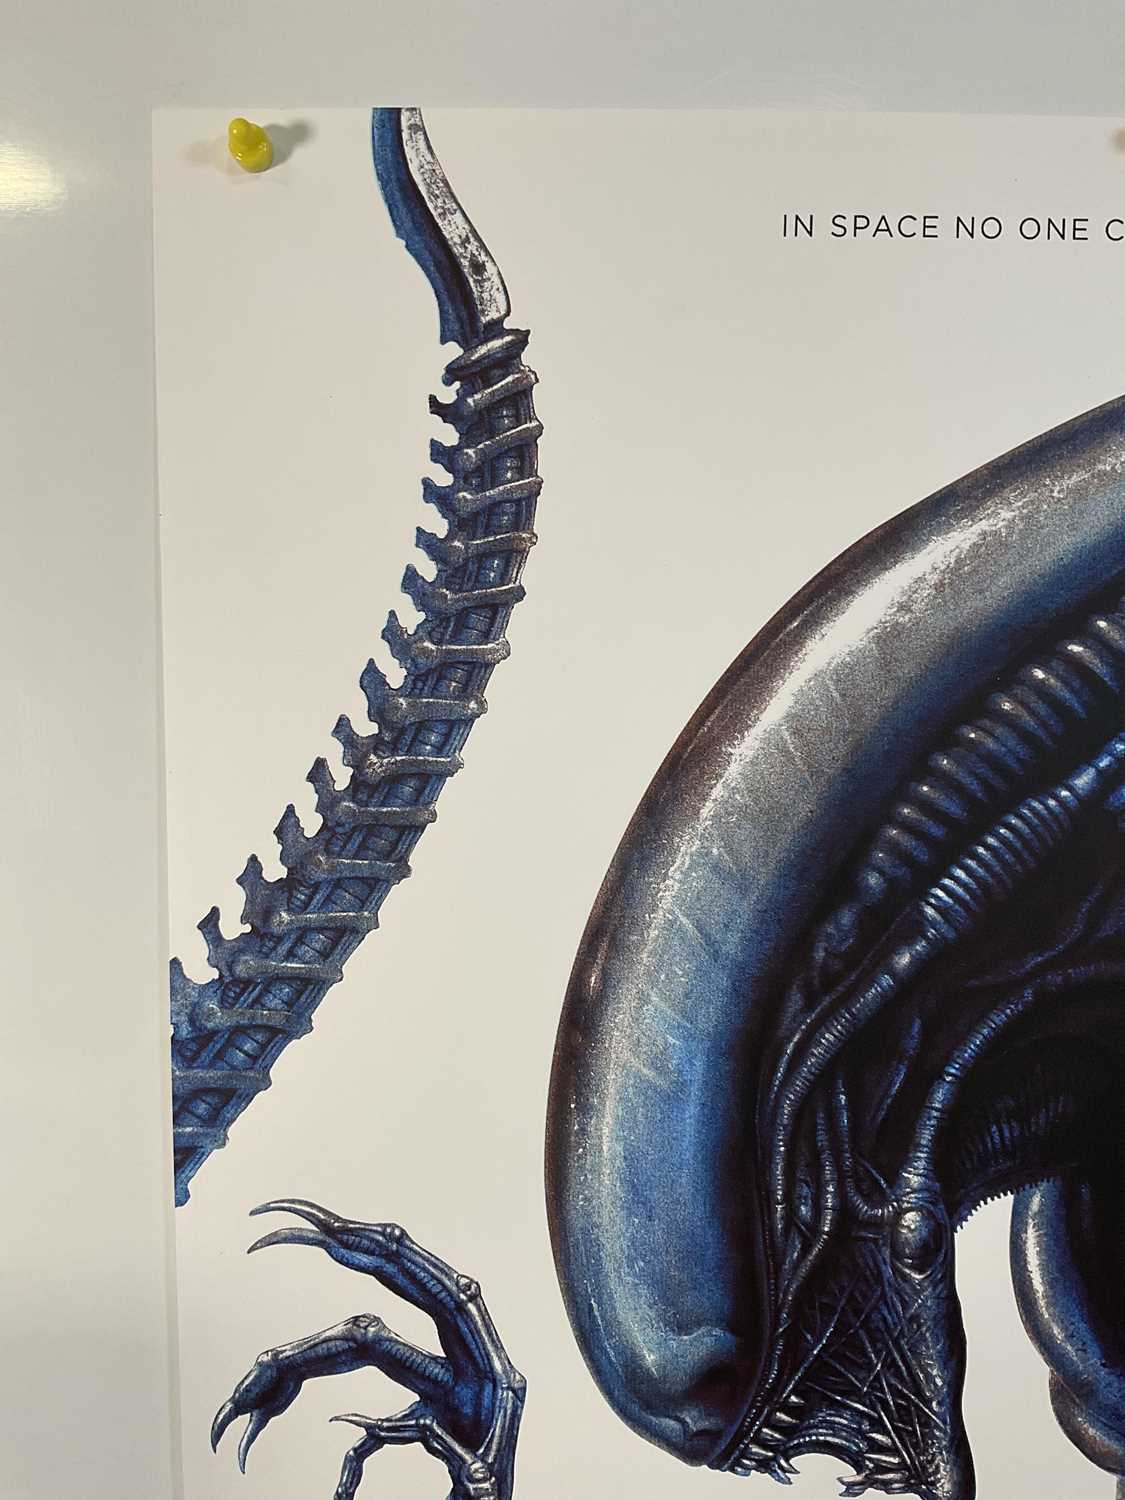 ALIEN (1982) - 2017 alternative movie poster - Mondo, by Winters, limited edition 690/1785. 92cm x - Image 6 of 6